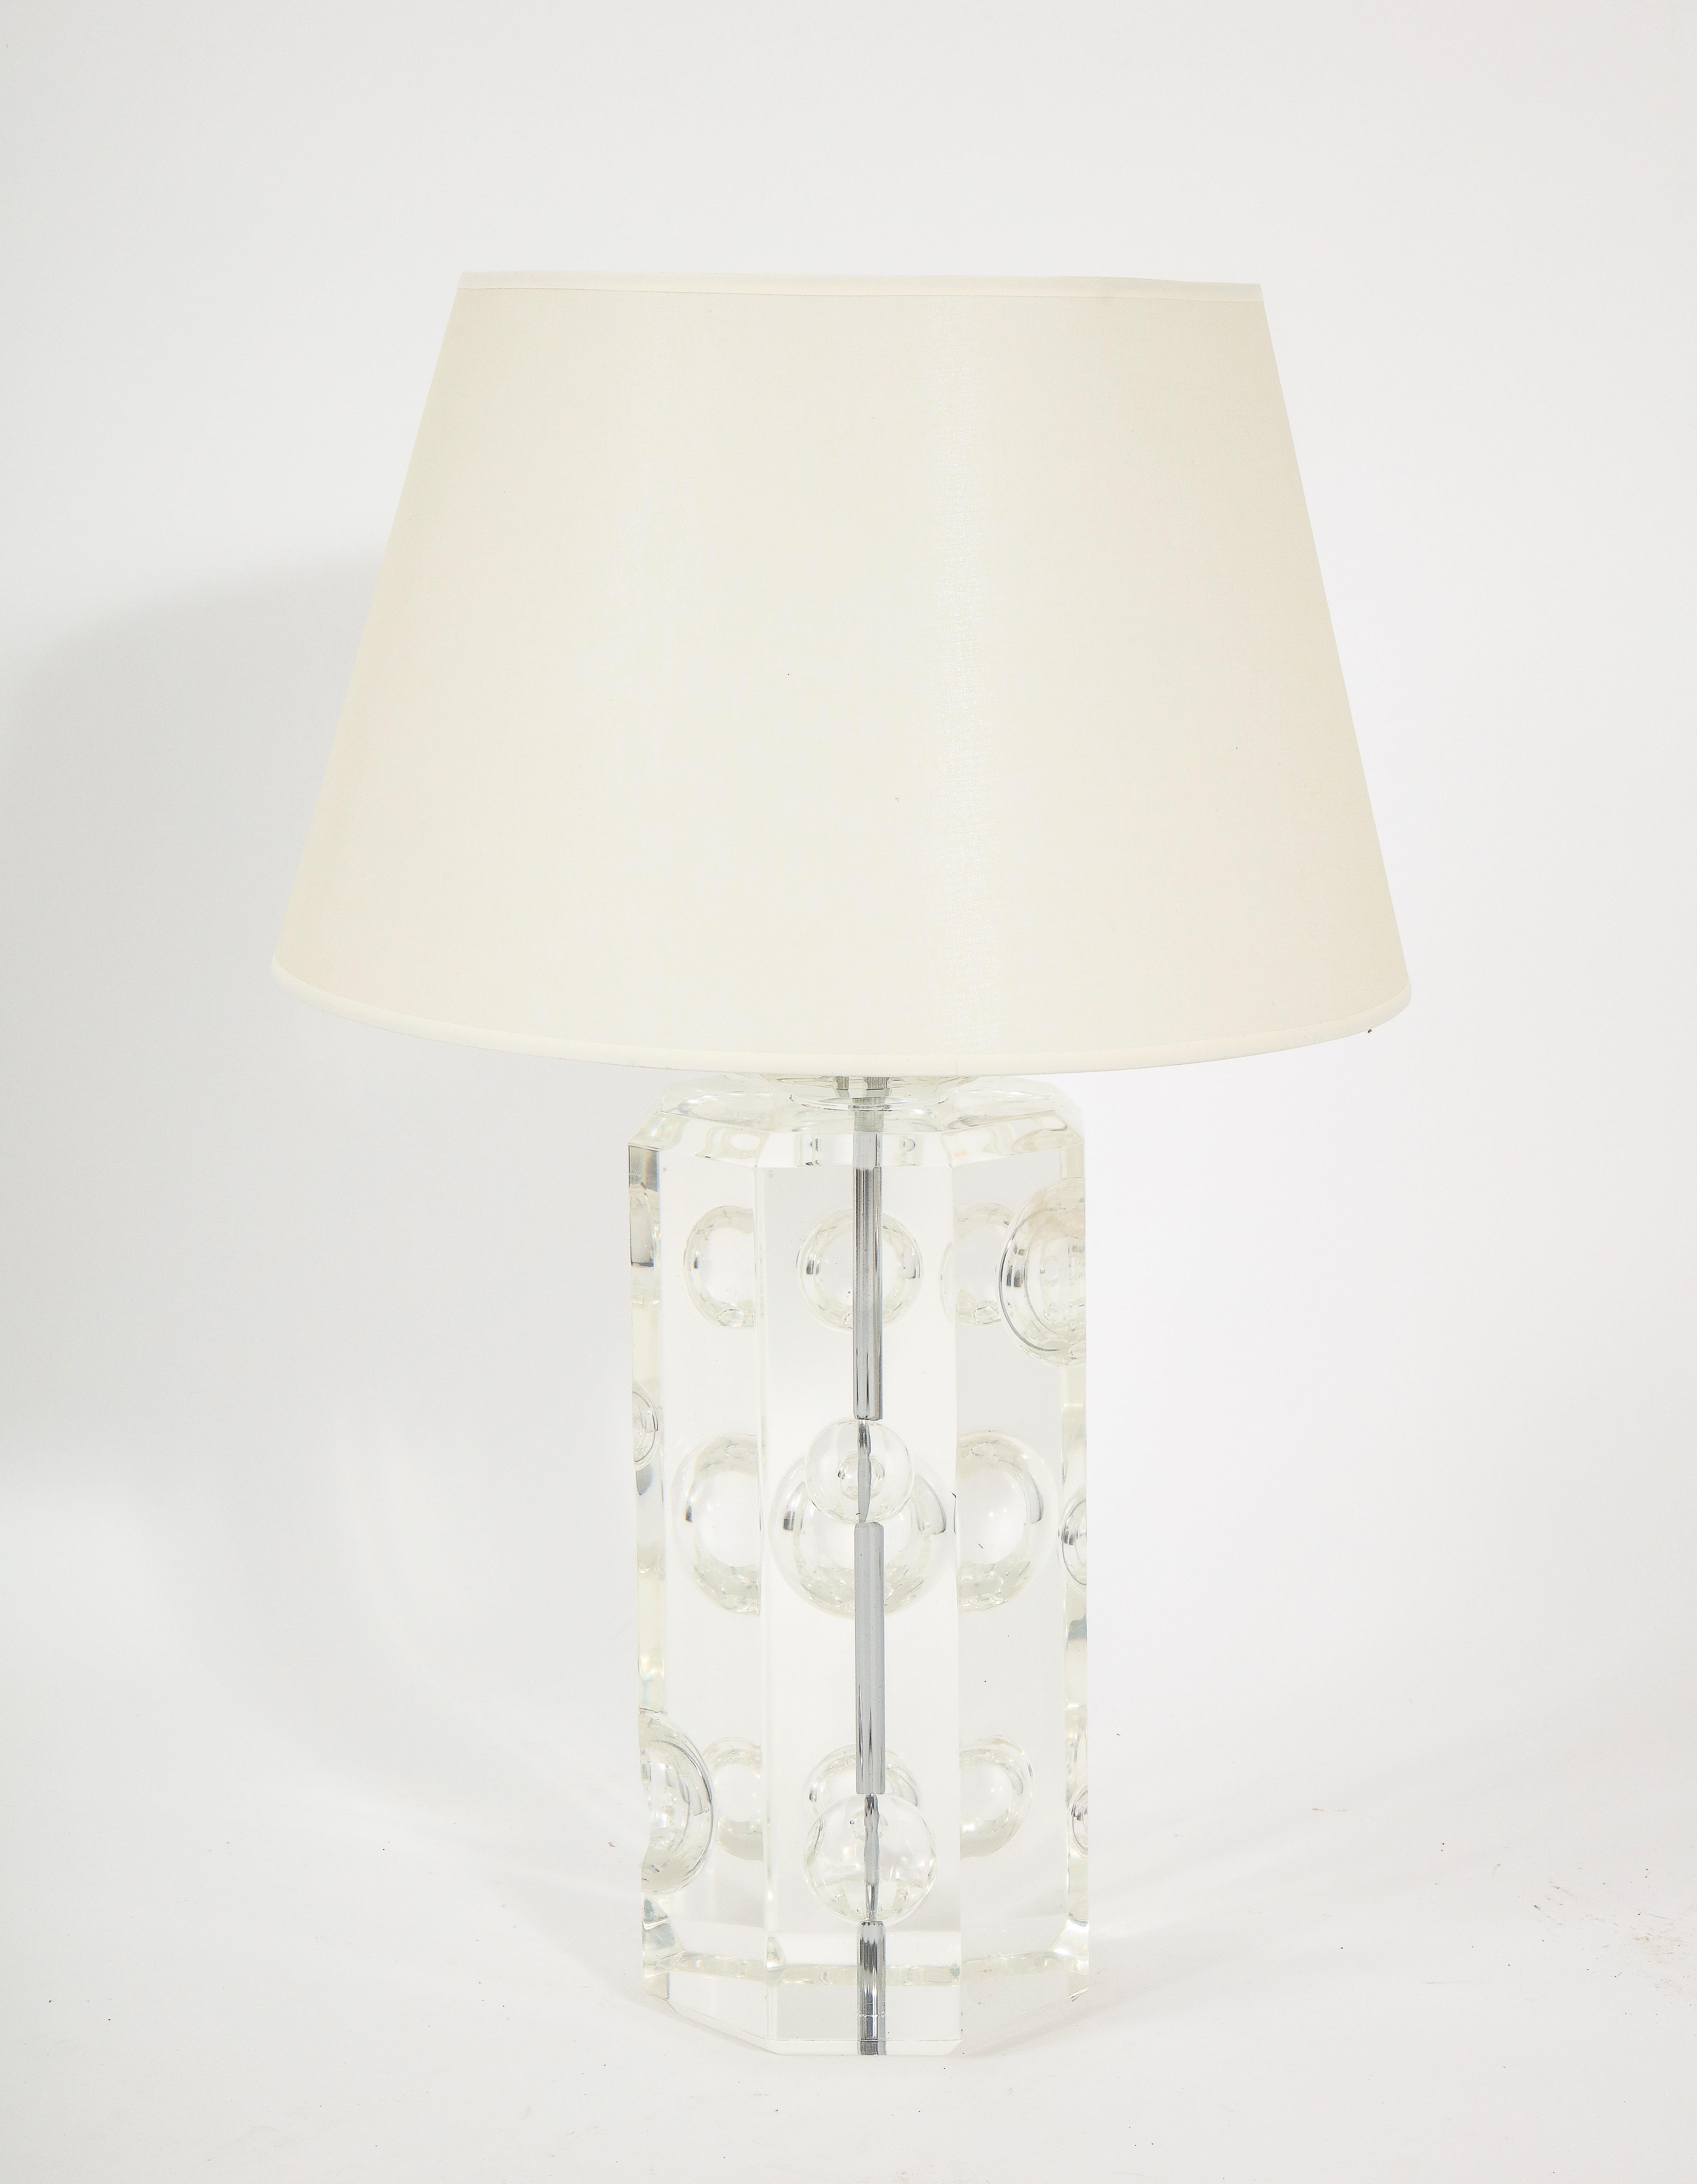 Large Studio Lucite Lamp, USA 1960's For Sale 6